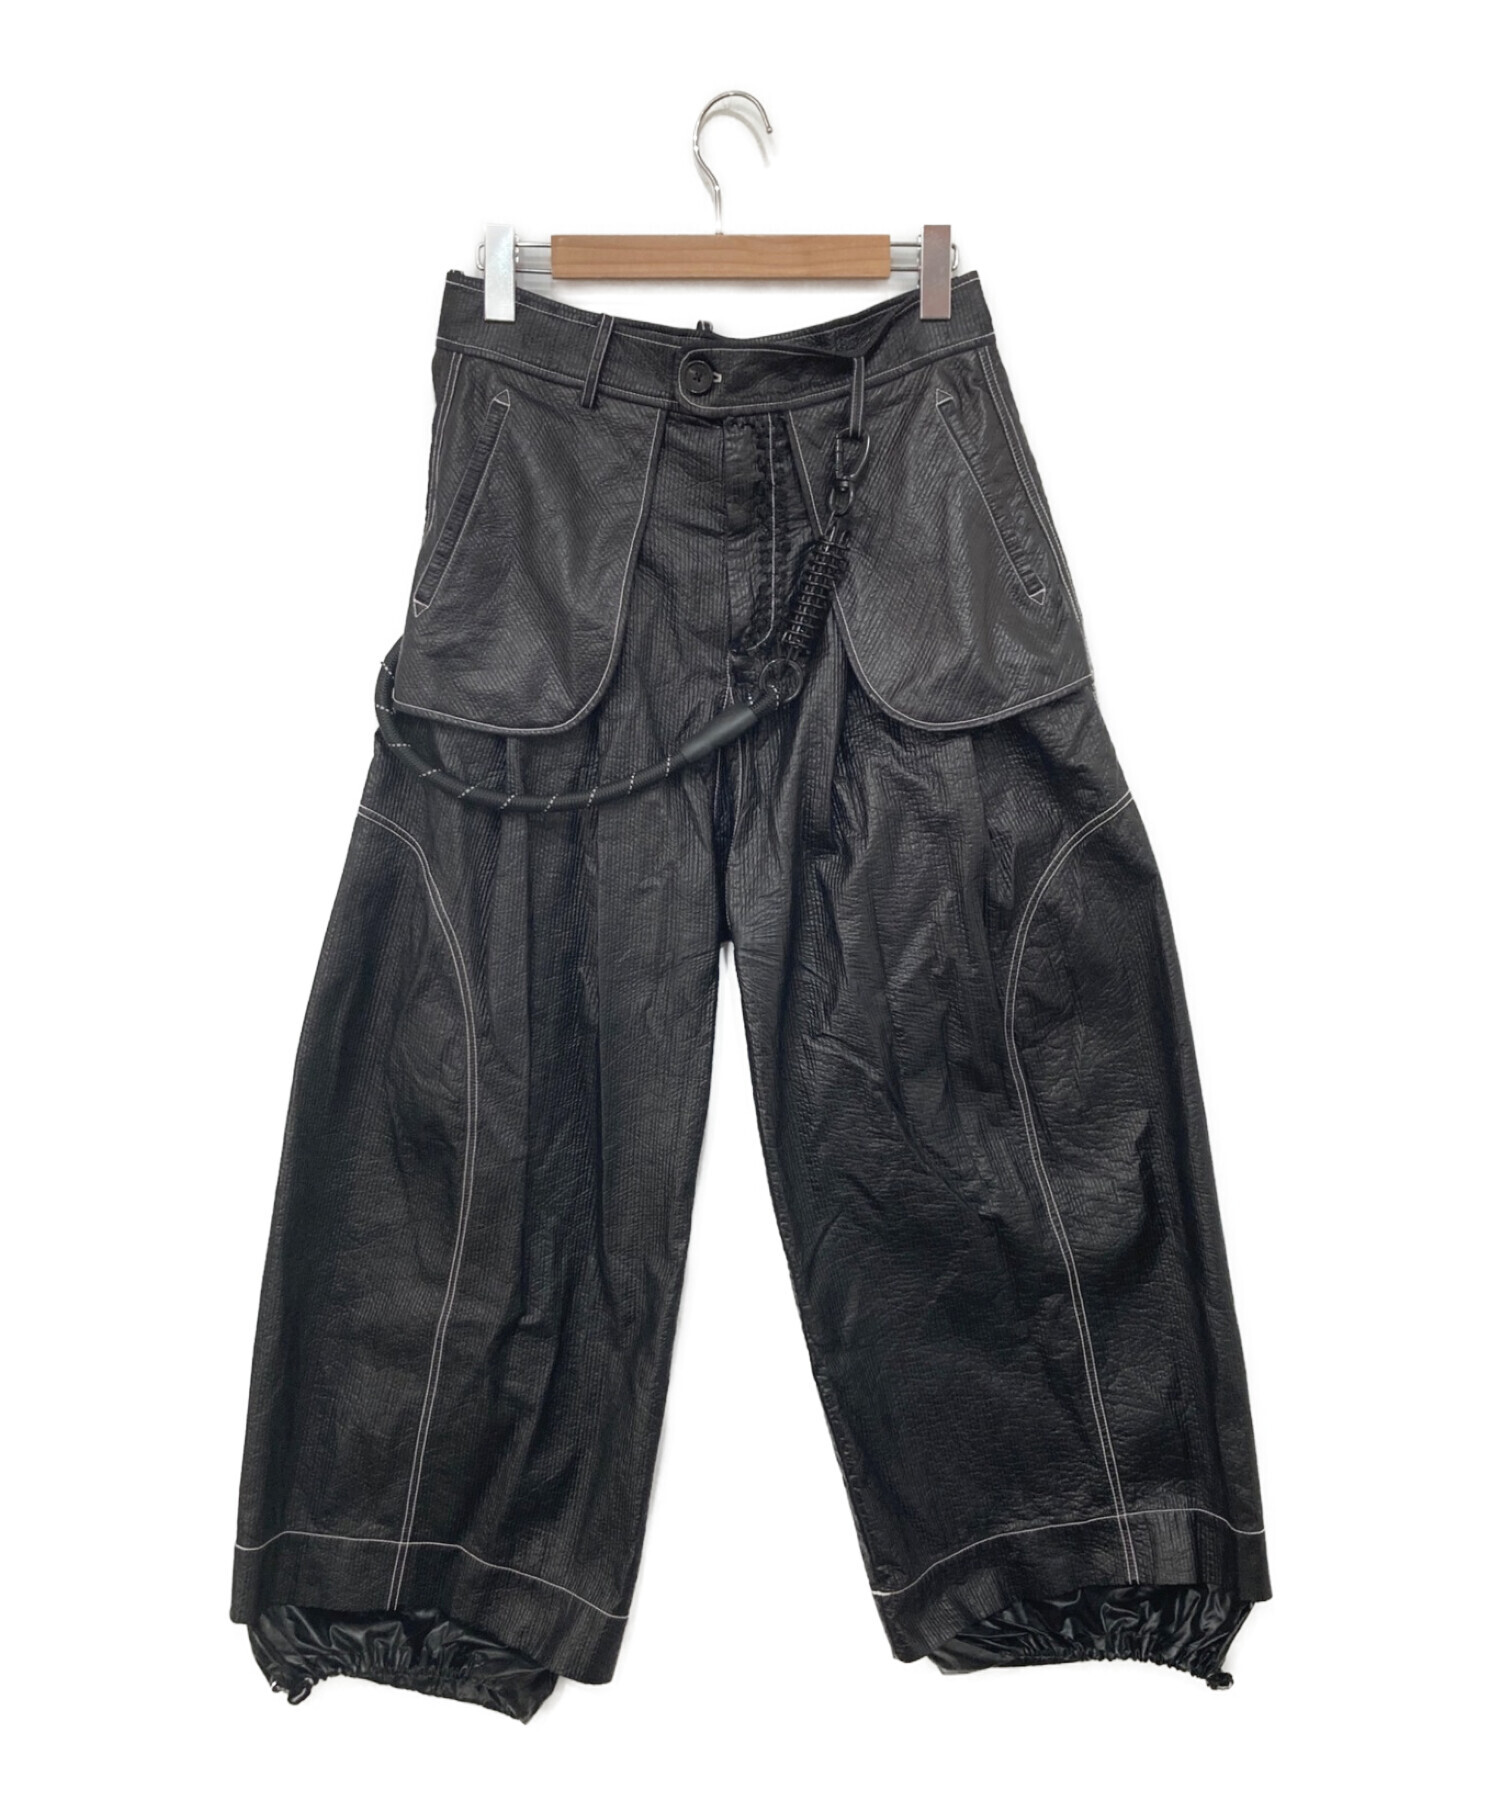 NUTEMPEROR WIDE PU LEATHER PANTSナットエンペラー